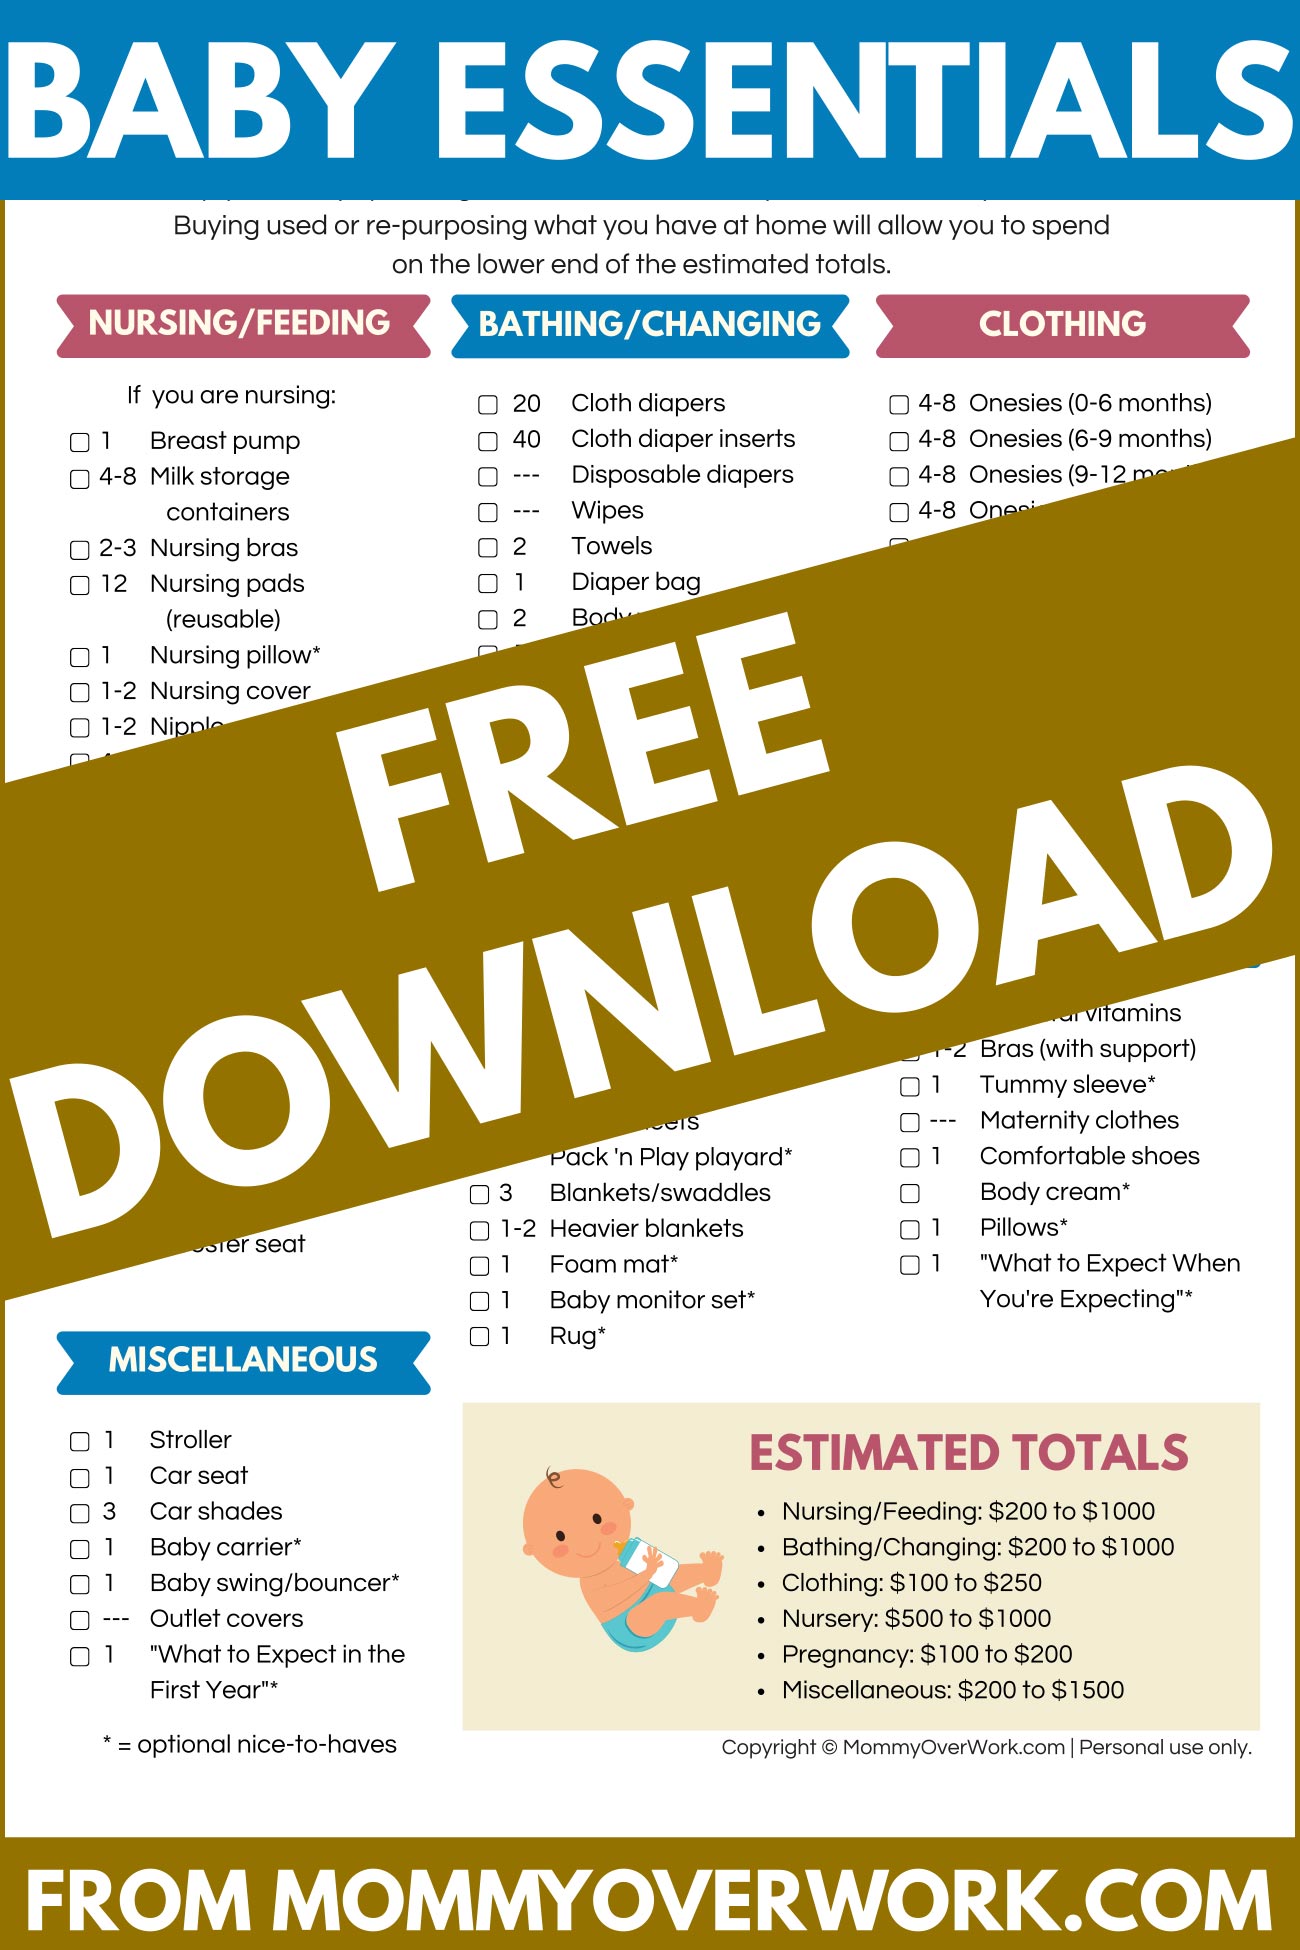 https://mommyoverwork.com/wp-content/uploads/baby-essentials-necessities-things-new-baby-checklist-pdf-free-printable..jpg